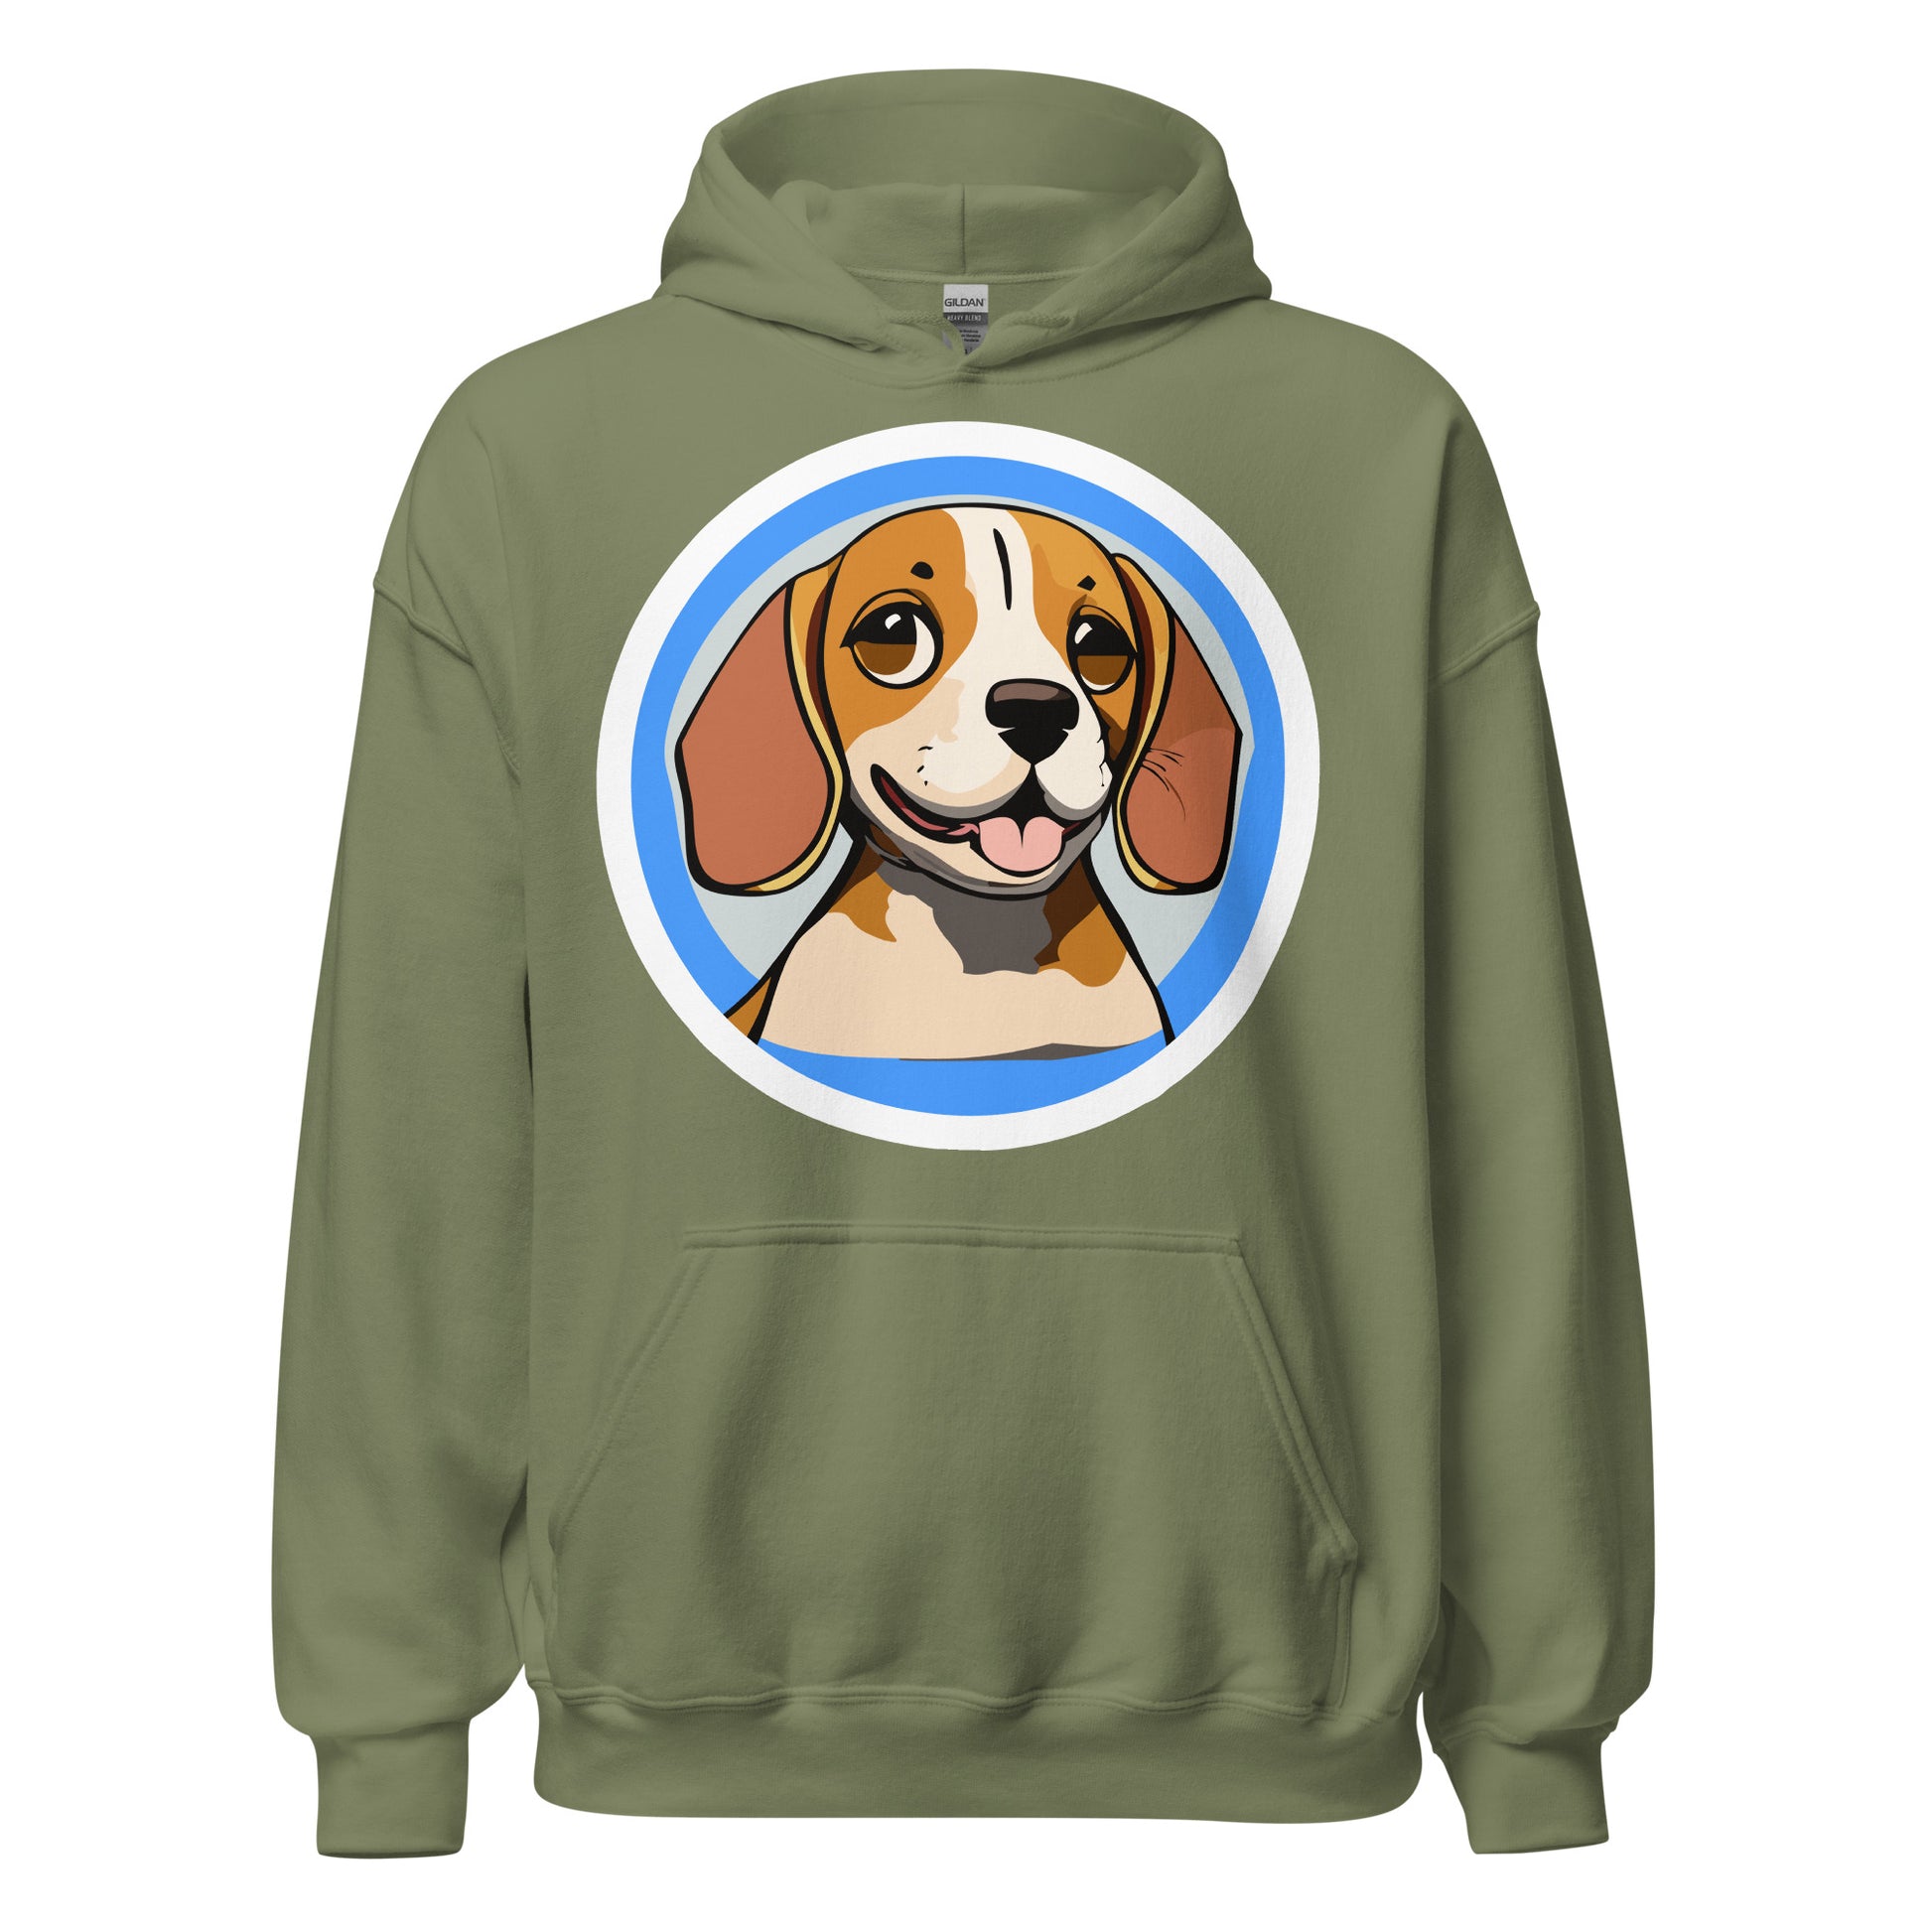 Comfy unisex hoodie for him or her with a cute beagle image, in military green